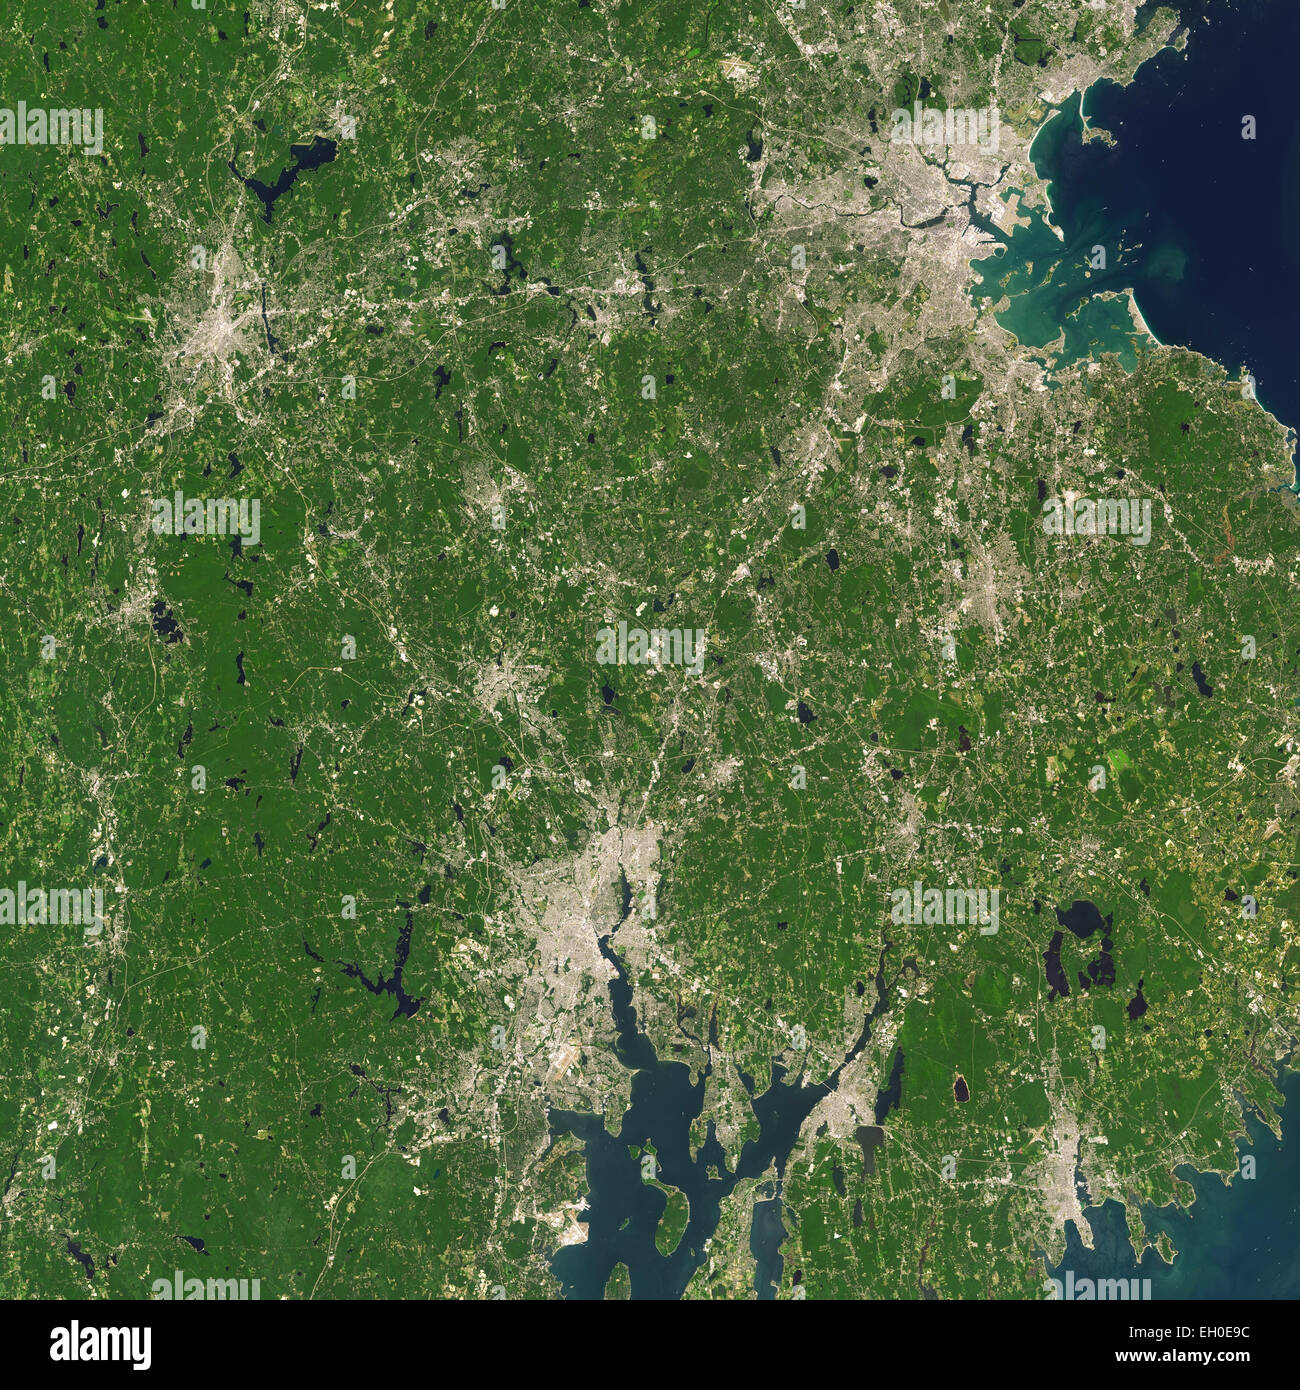 Landsat 7 image of  Boston/Providence area acquired August 25, 2014.  Landsat 7 is a U.S. satellite used to acquire remotely sensed images of the Earth's land surface and surrounding coastal regions. It is maintained by the Landsat 7 Project Science Office at the NASA Goddard Space Flight Center in Greenbelt, MD...Landsat satellites have been acquiring images of the Earth’s land surface since 1972.  Currently there are more than 2 million Landsat images in the National Satellite Land Remote Sensing Data Archive. Stock Photo